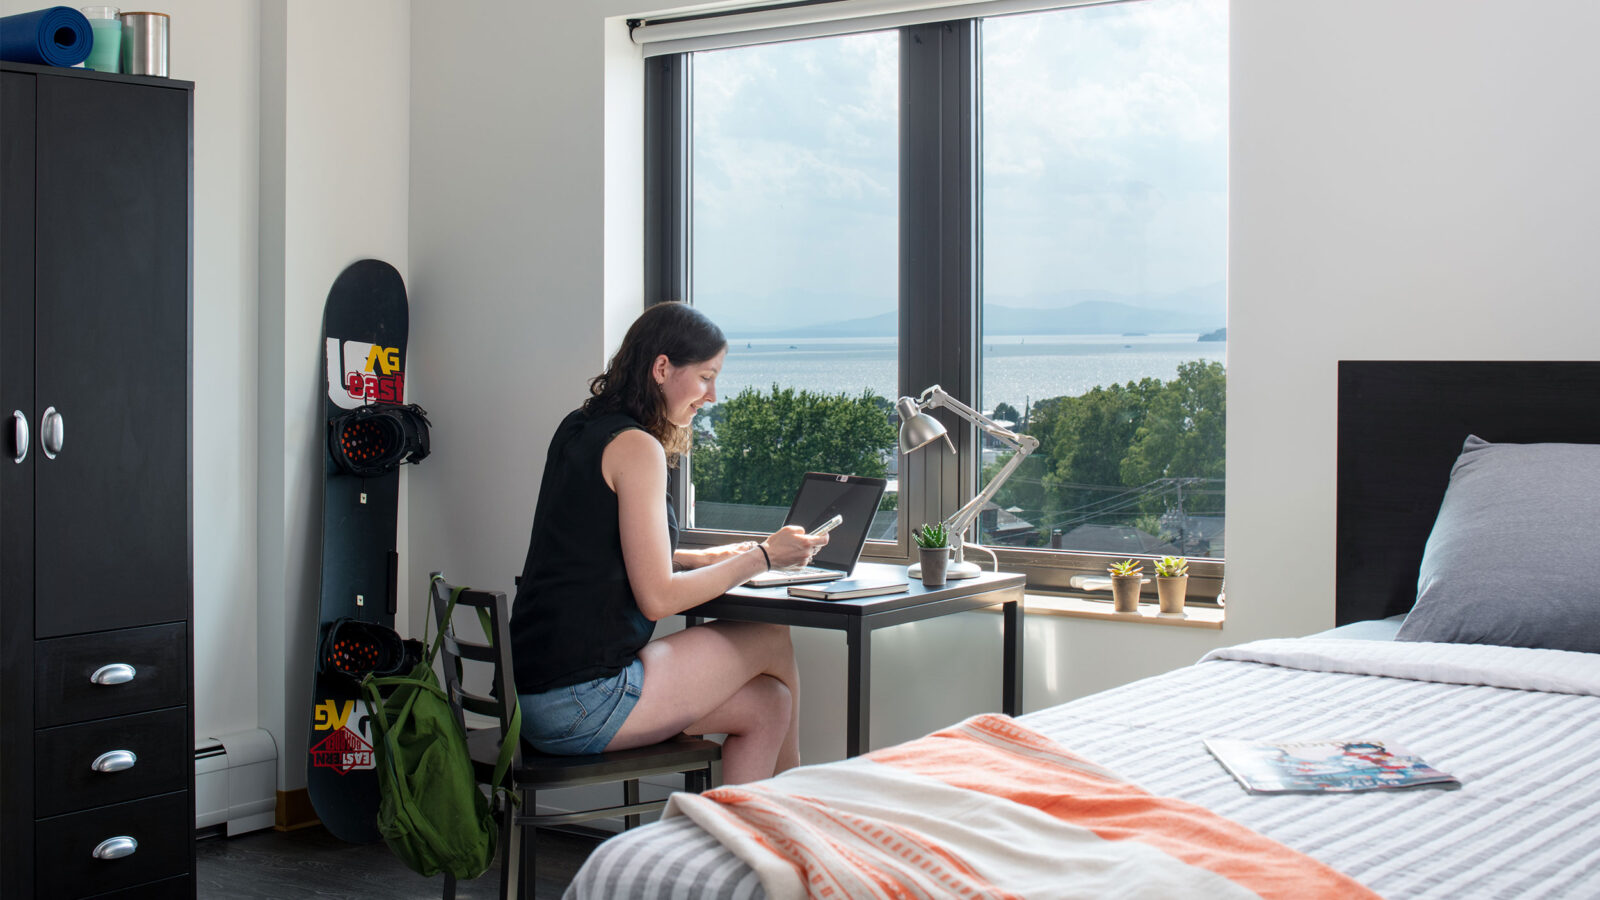 student sits at a desk in 194 residence hall room. the desk is next to a single bed and a lake view is out the desk window